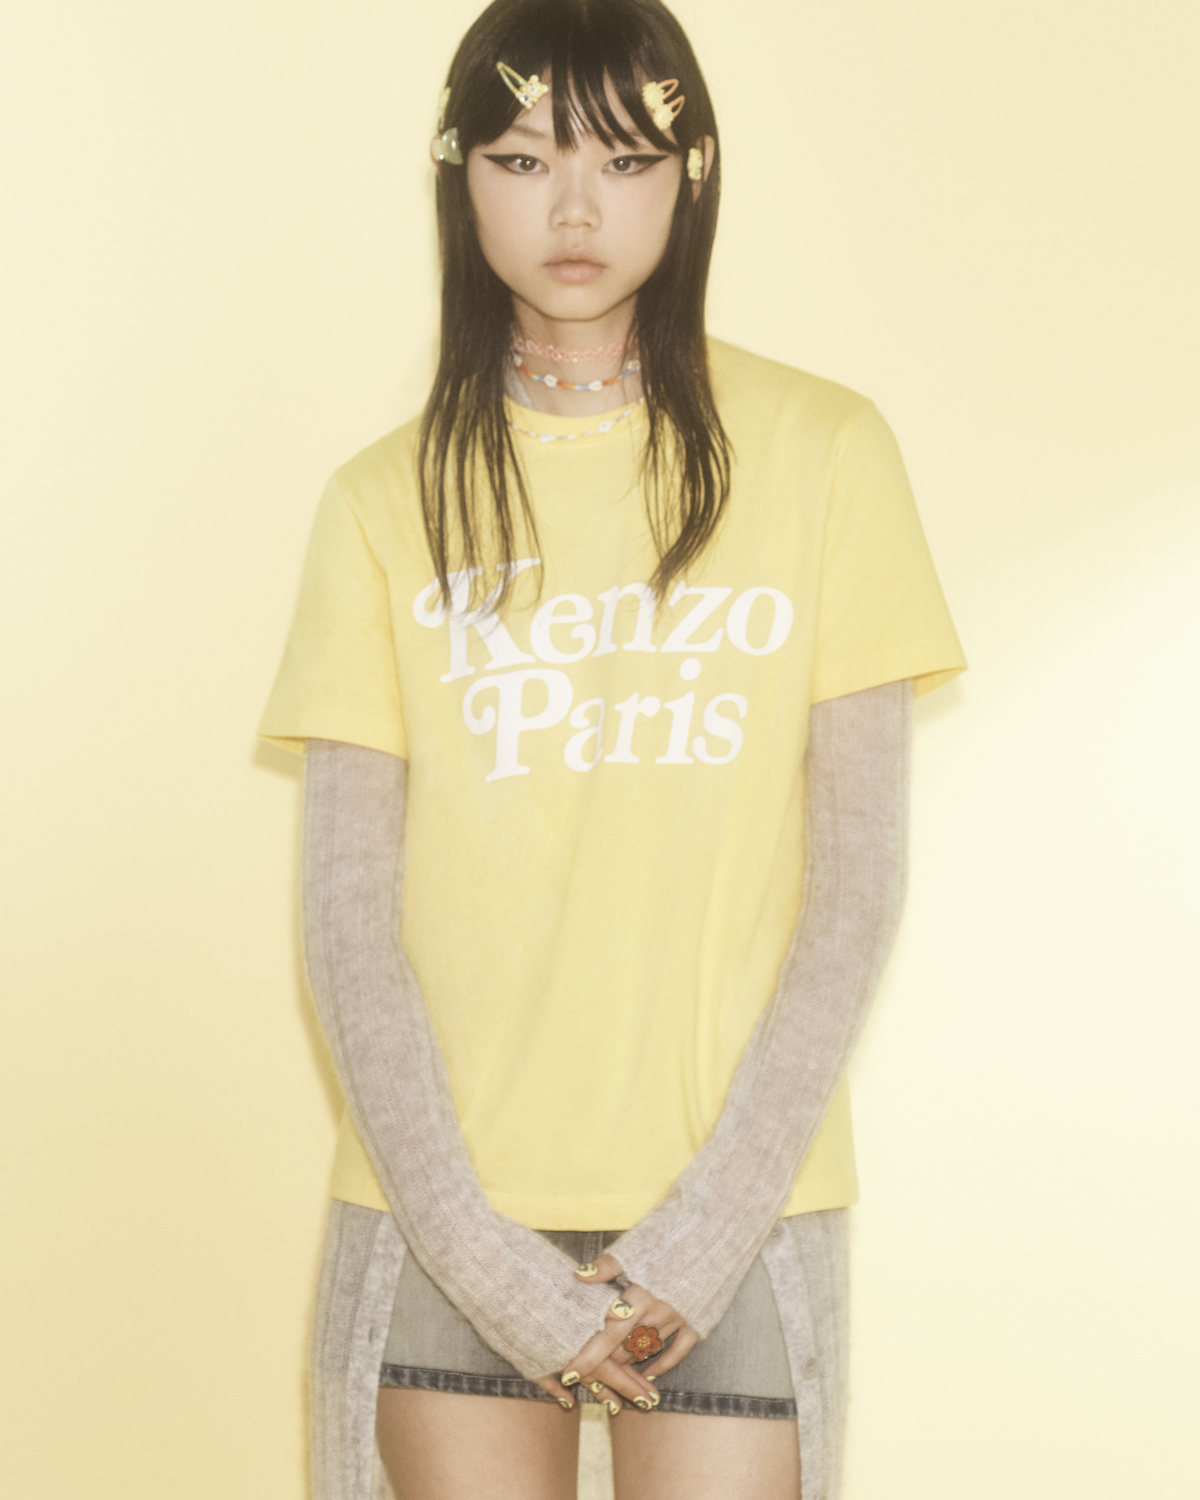 The Kenzo X Verdy ‘Colors’ Collection